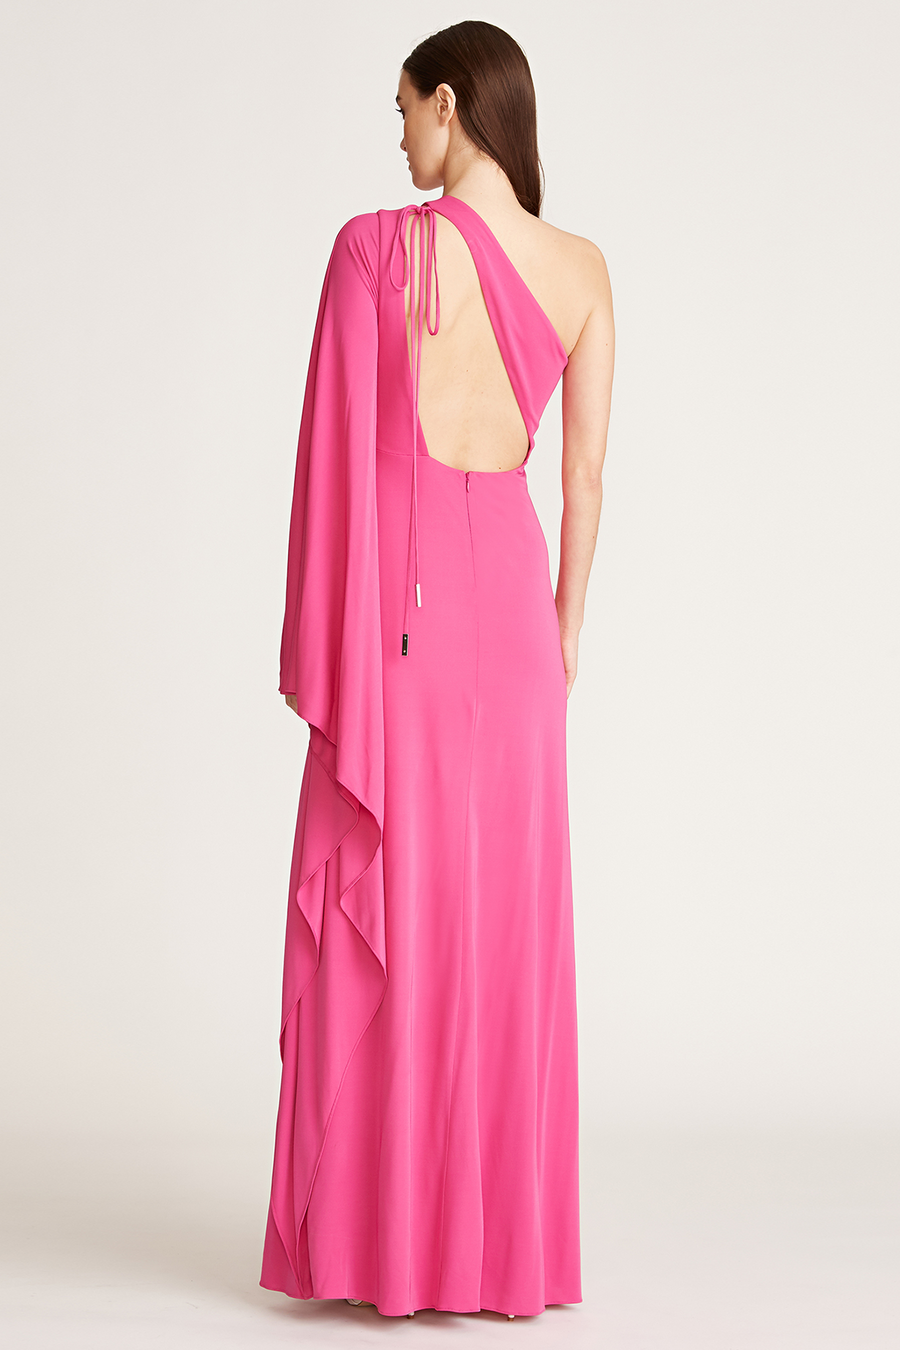 Halston - Lydia One Shoulder Gown - Orchid